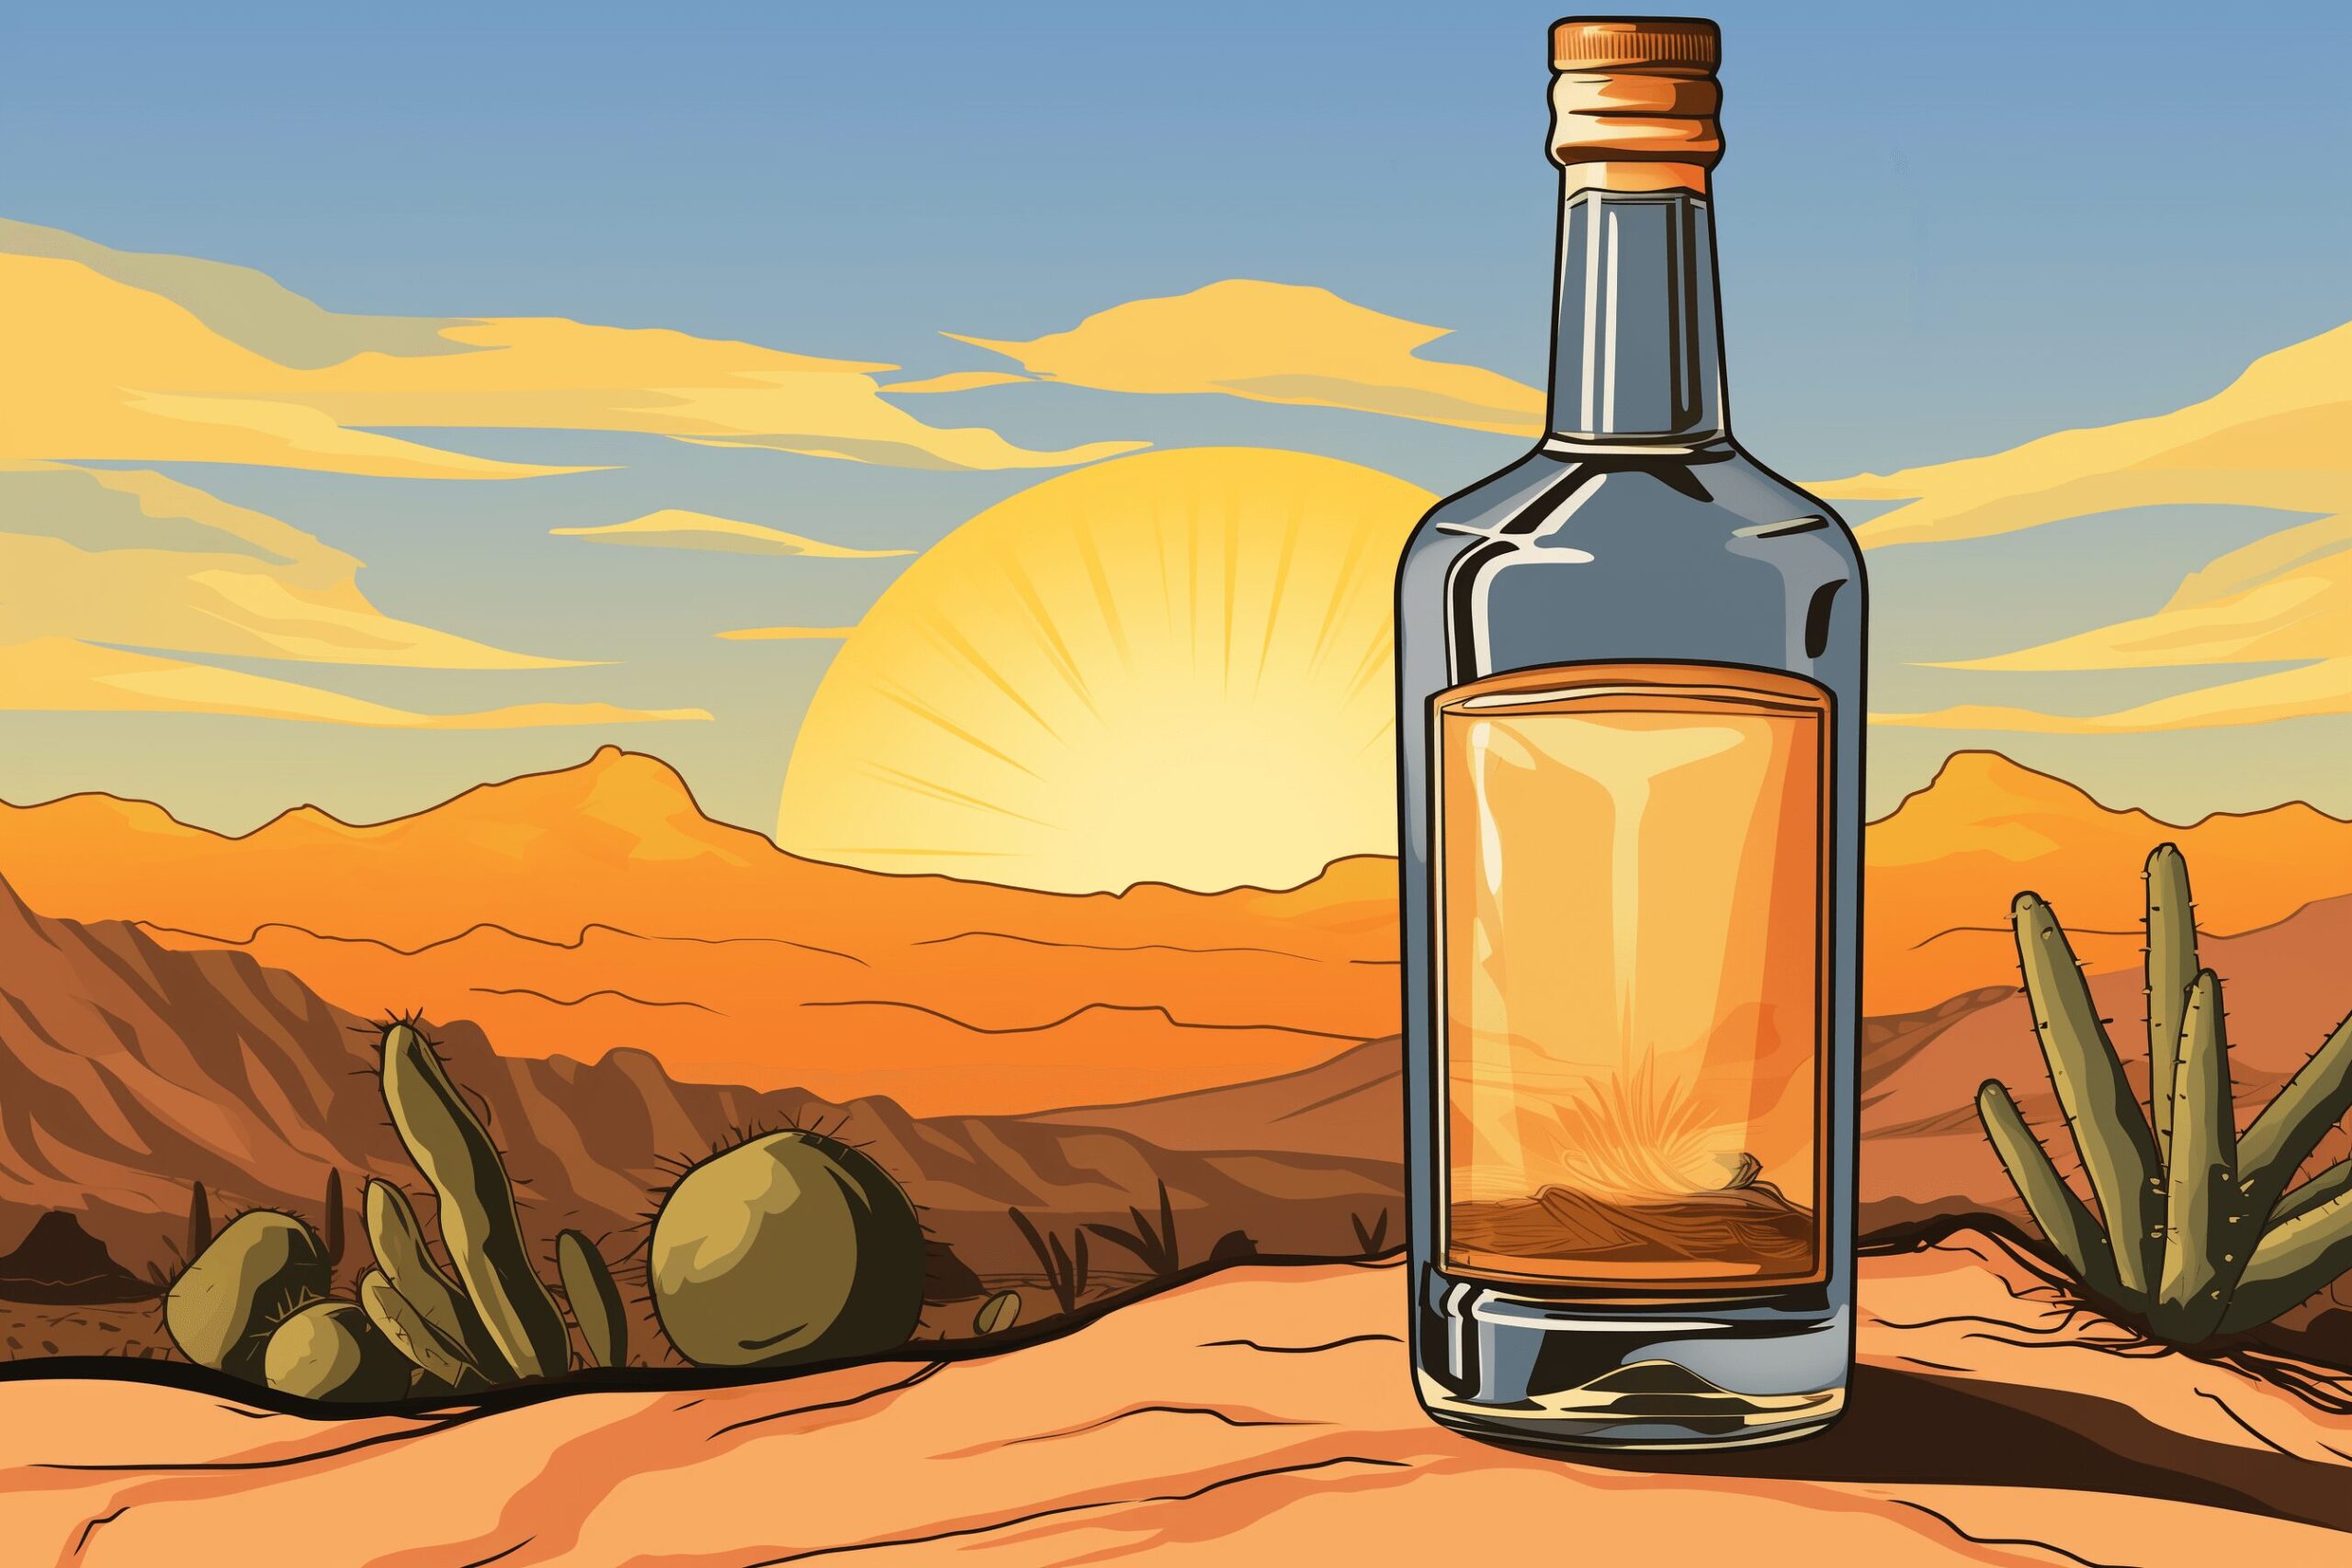 A bottle of tequila in the desert